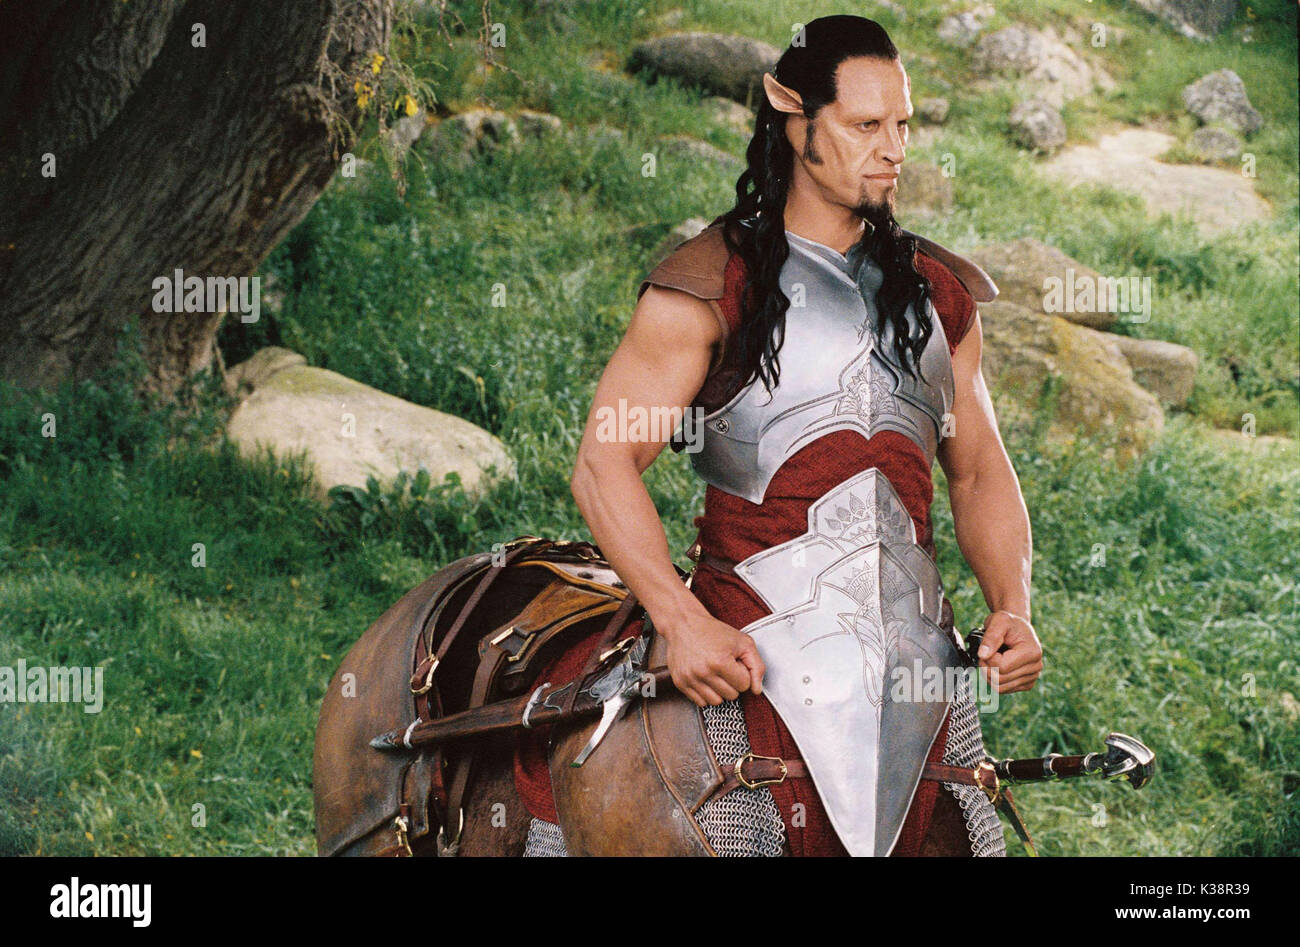 Pictured:  The centaur Oreius (PATRICK KAKE) in a scene from THE CHRONICLES OF NARNIA: THE LION, THE WITCH AND THE WARDROBE, directed by Andrew Adamson.       Distributed by Buena Vista International.  THIS MATERIAL MAY BE LAWFULLY USED IN ALL MEDIA ONLY TO PROMOTE THE RELEASE OF THE MOTION PICTURE ENTITLED THE CHRONICLES OF NARNIA: THE LION, THE WITCH AND THE WARDROBE DURING THE PICTURE'S PROMOTIONAL WINDOWS. ANY OTHER USE, RE-USE, DUPLICATION OR POSTING OF THIS MATERIAL IS STRICTLY PROHIBITED WITHOUT THE EXPRESS WRITTEN CONSENT OF WALT DISNEY PICTURES & WALDEN MEIDA. AND COUL Stock Photo